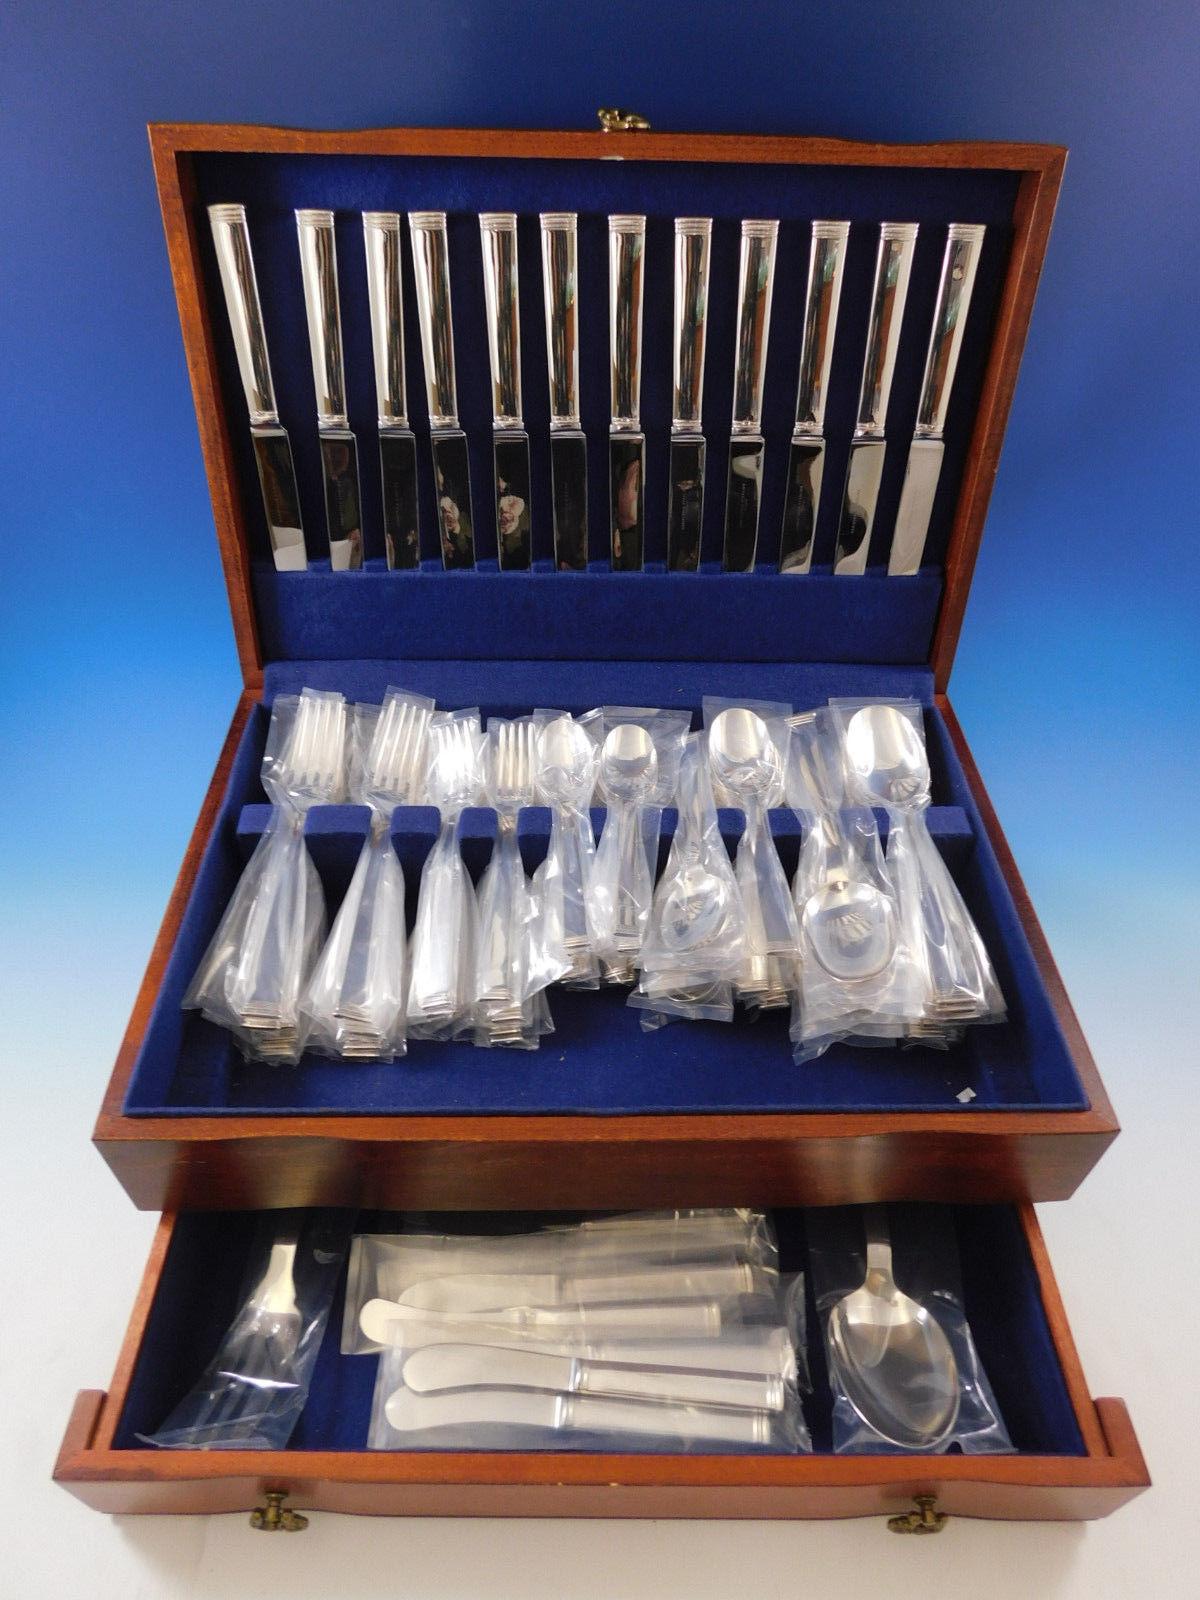 Superb dinner size Commodore by Christofle France sterling silver Flatware set - 86 pieces. This set includes:

12 Dinner size knives, 9 3/4